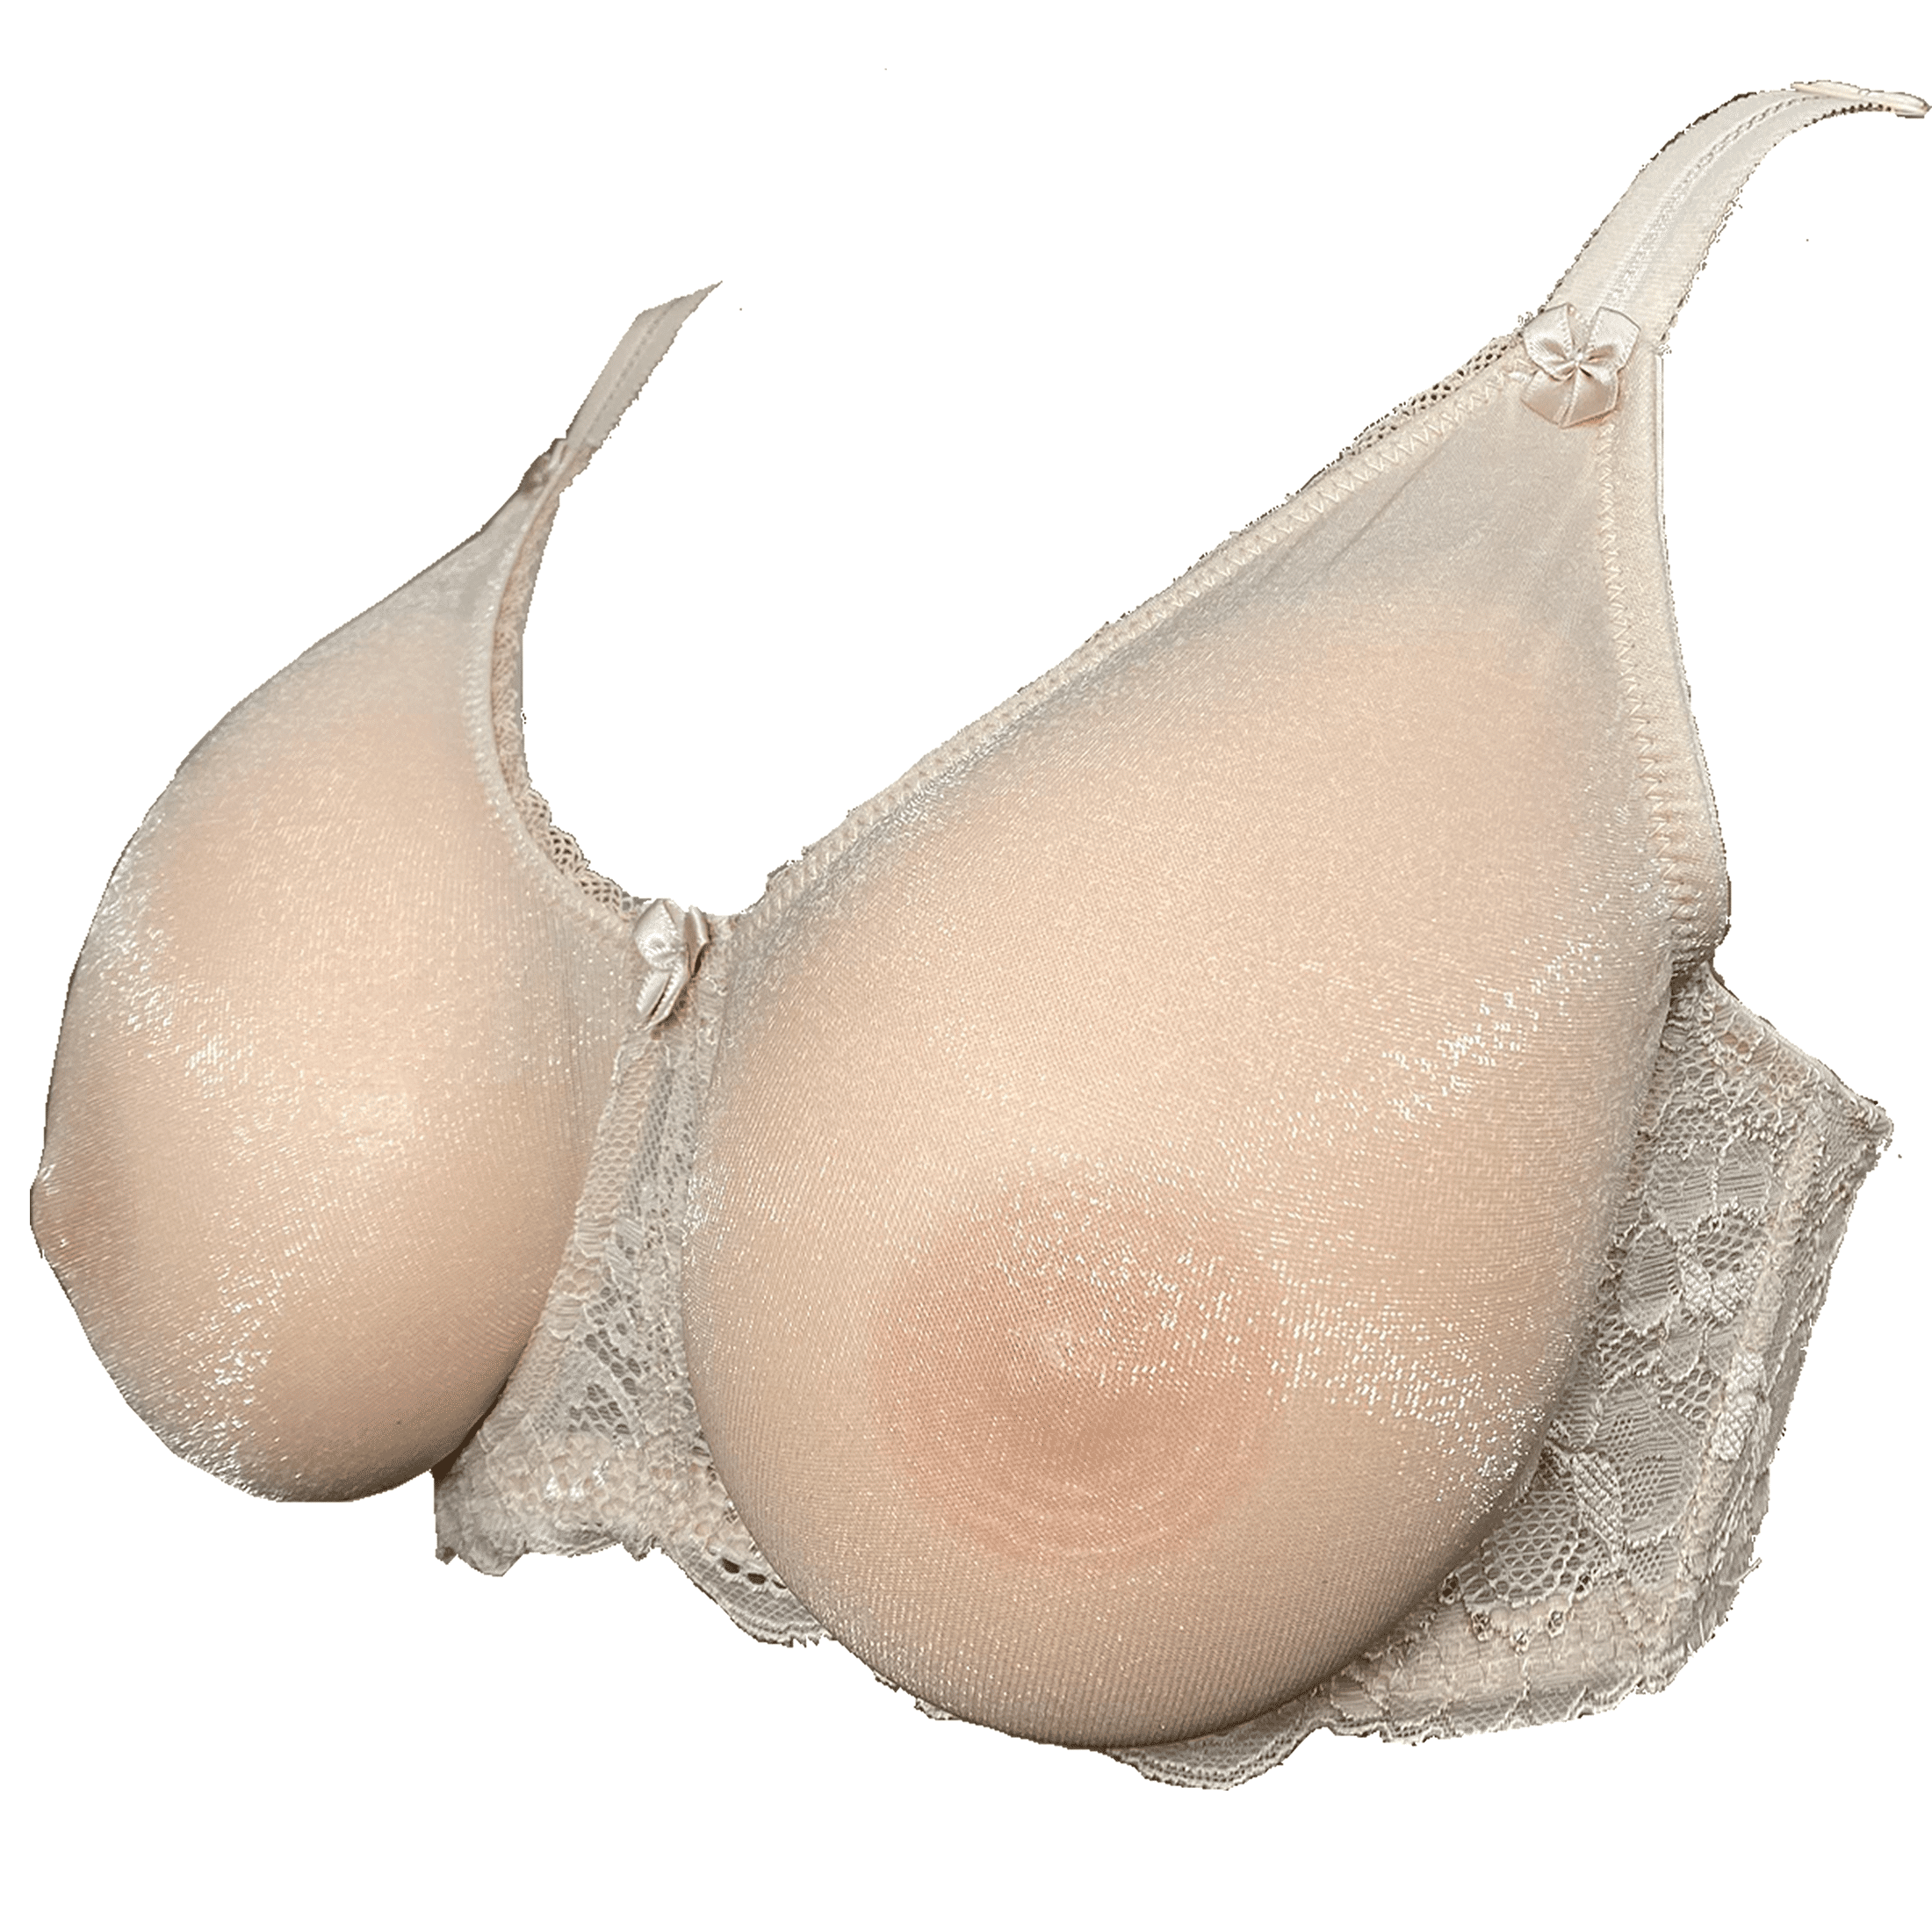 BIMEI See Through Bra CD Lace Mastectomy Lingerie Bra Silicone Breast Forms  Prosthesis Pocket Bra with Steel Ring 9018,Beige,40D 